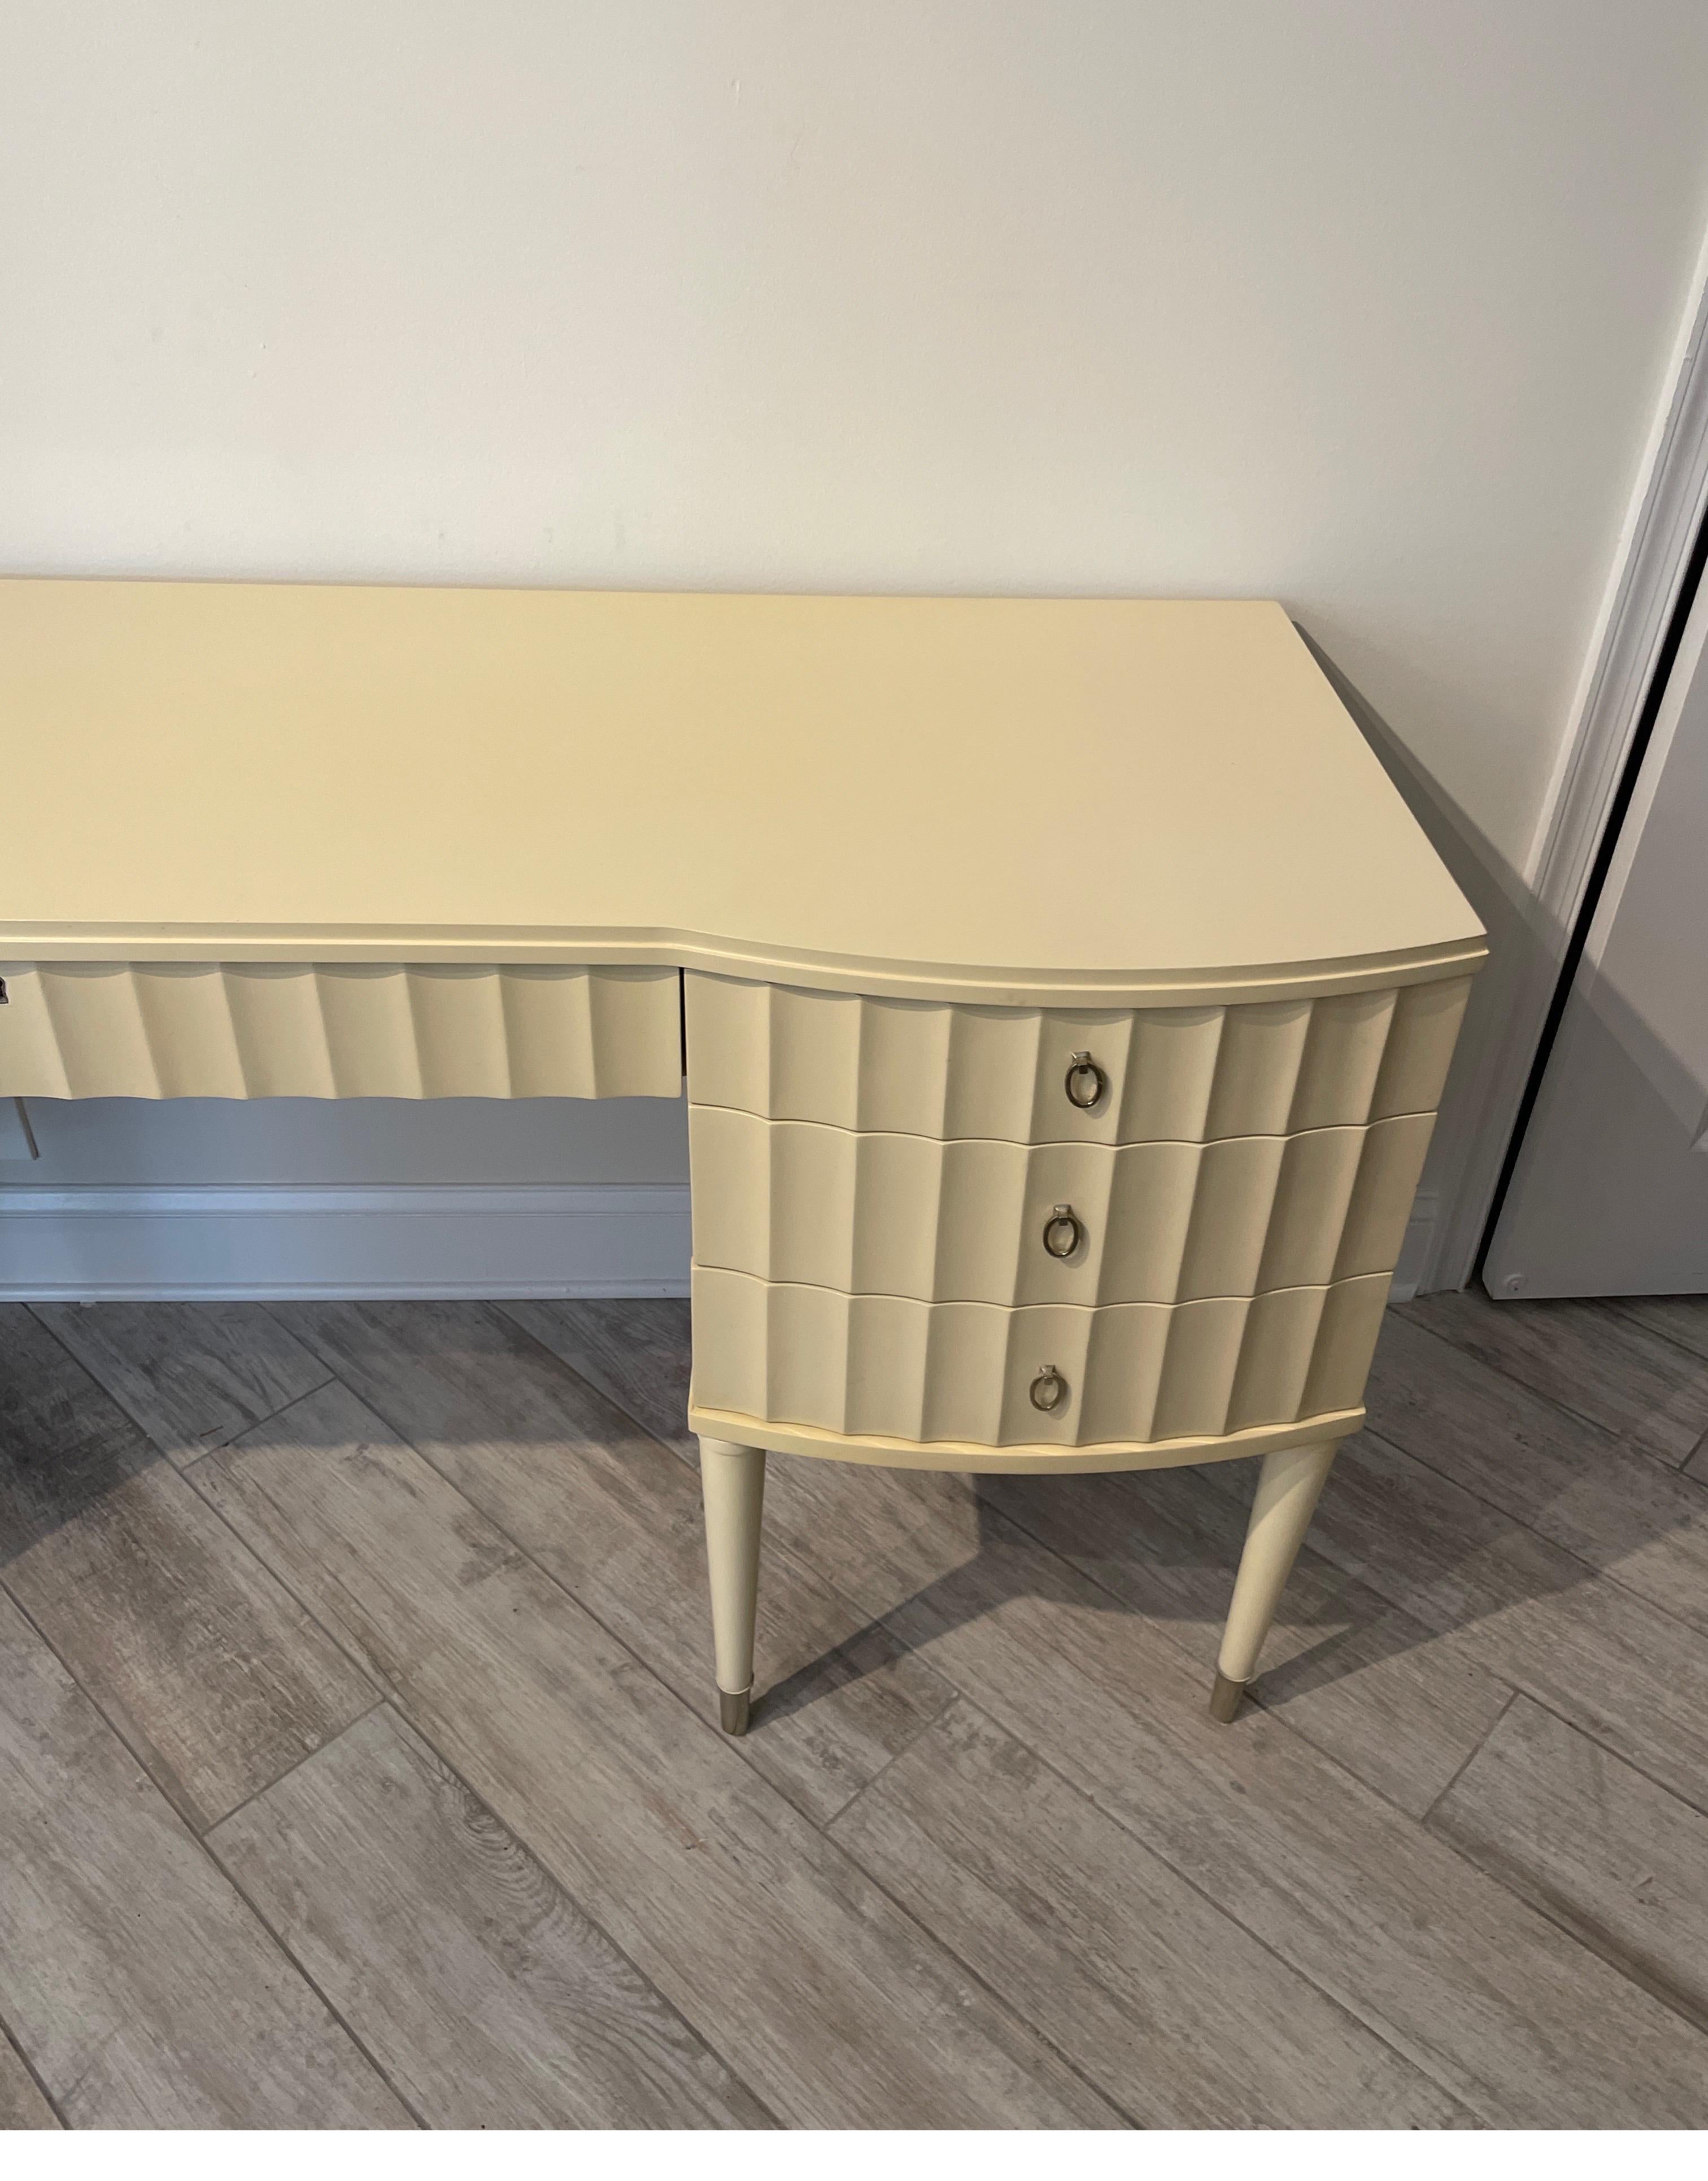 Chic cream-colored art deco style dressing table / vanity by Barbara Barry for Henredon. This glamorous piece will make you and your room feel special.